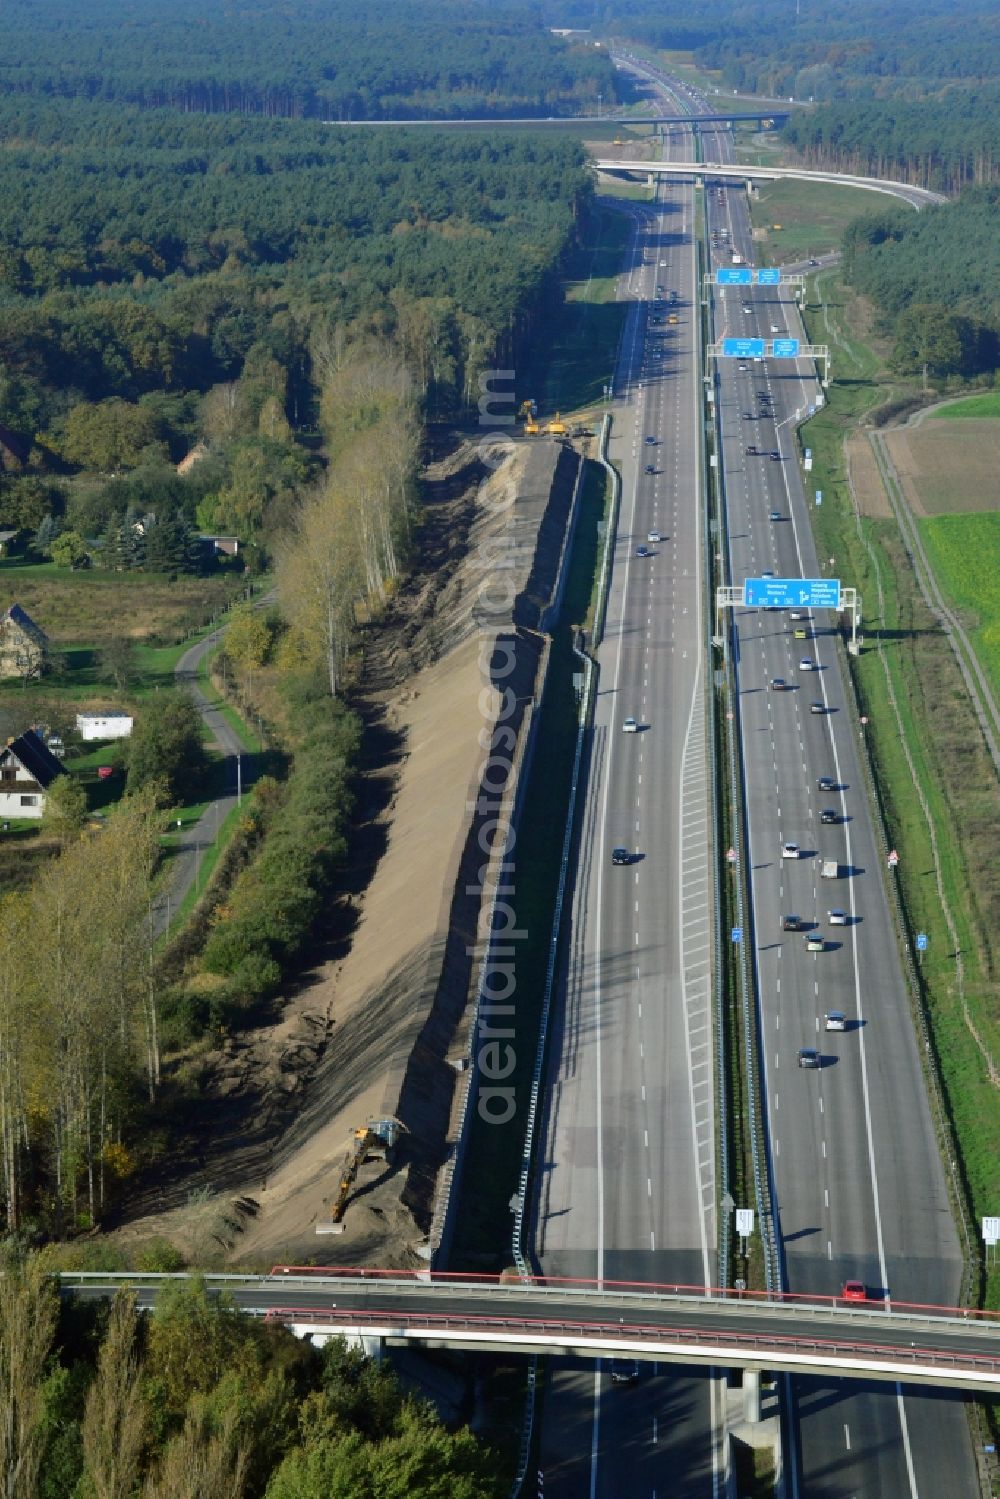 Neu Vehlefanz from the bird's eye view: Construction site of the junction Havelland at the motorway A10 and A24 in the state Brandenburg